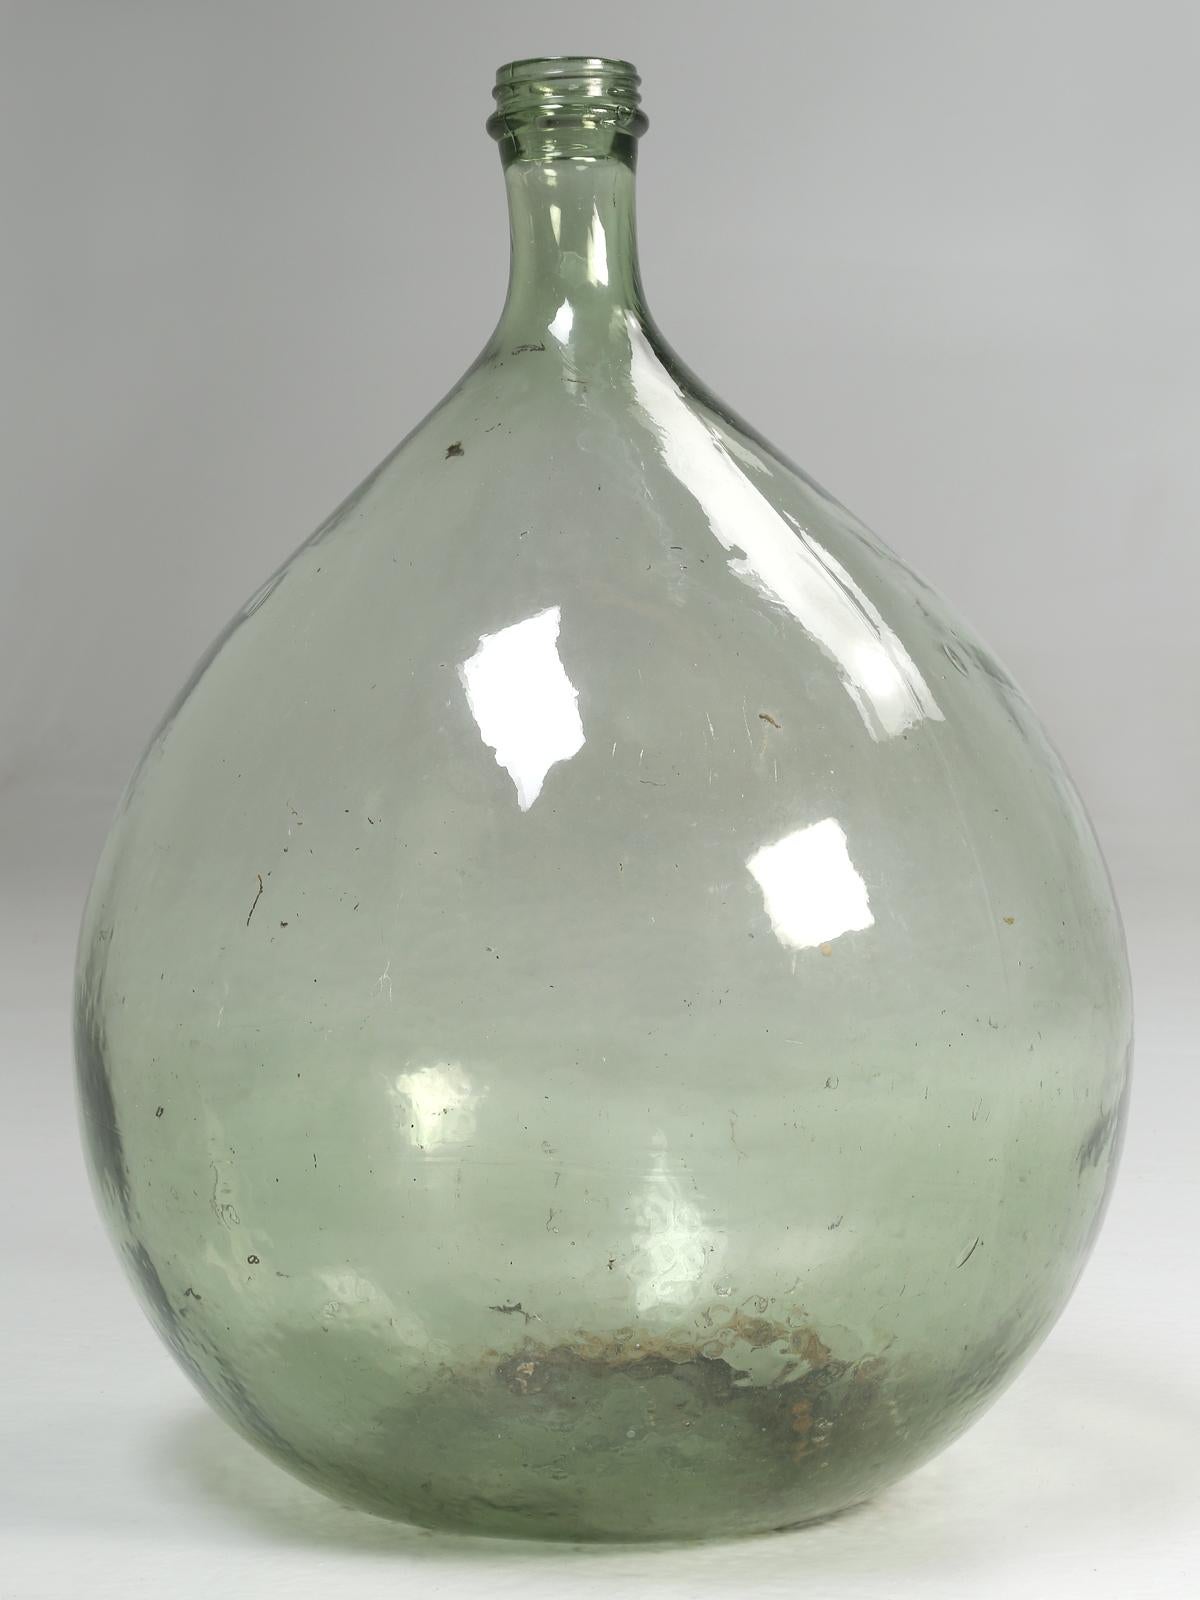 The Carboy name is from the Persia meaning big jug. Demijohn is French and is derived from, dame-Jeanne or Lady Jane. The glass containers were commonly used for in-home fermentation of wine or several other beverages.
Bottom reads, 